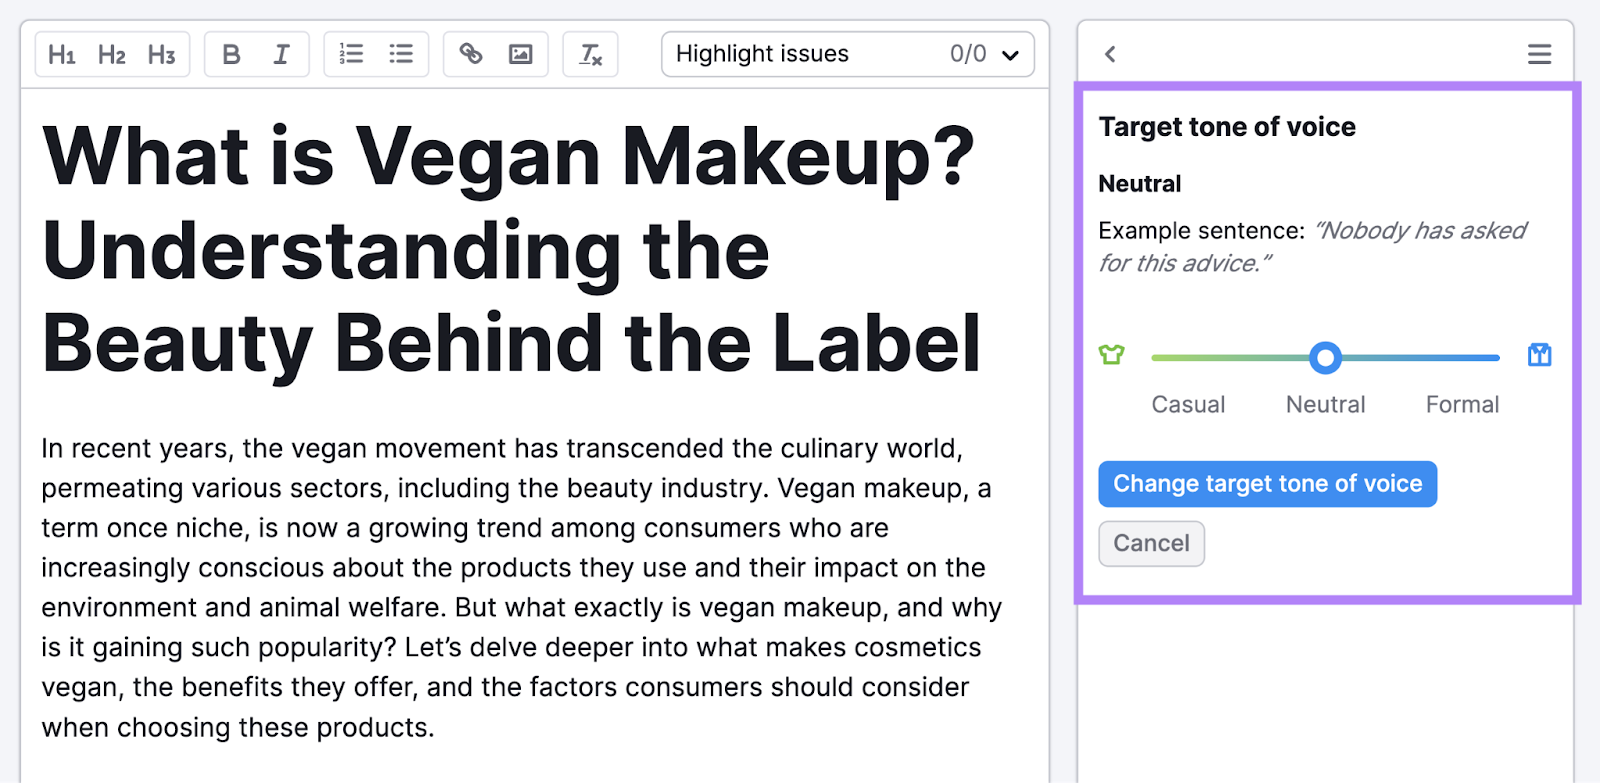 a blog post about vegan makeup in seo writing assistant tool with tone of voice slider, going from casual to formal